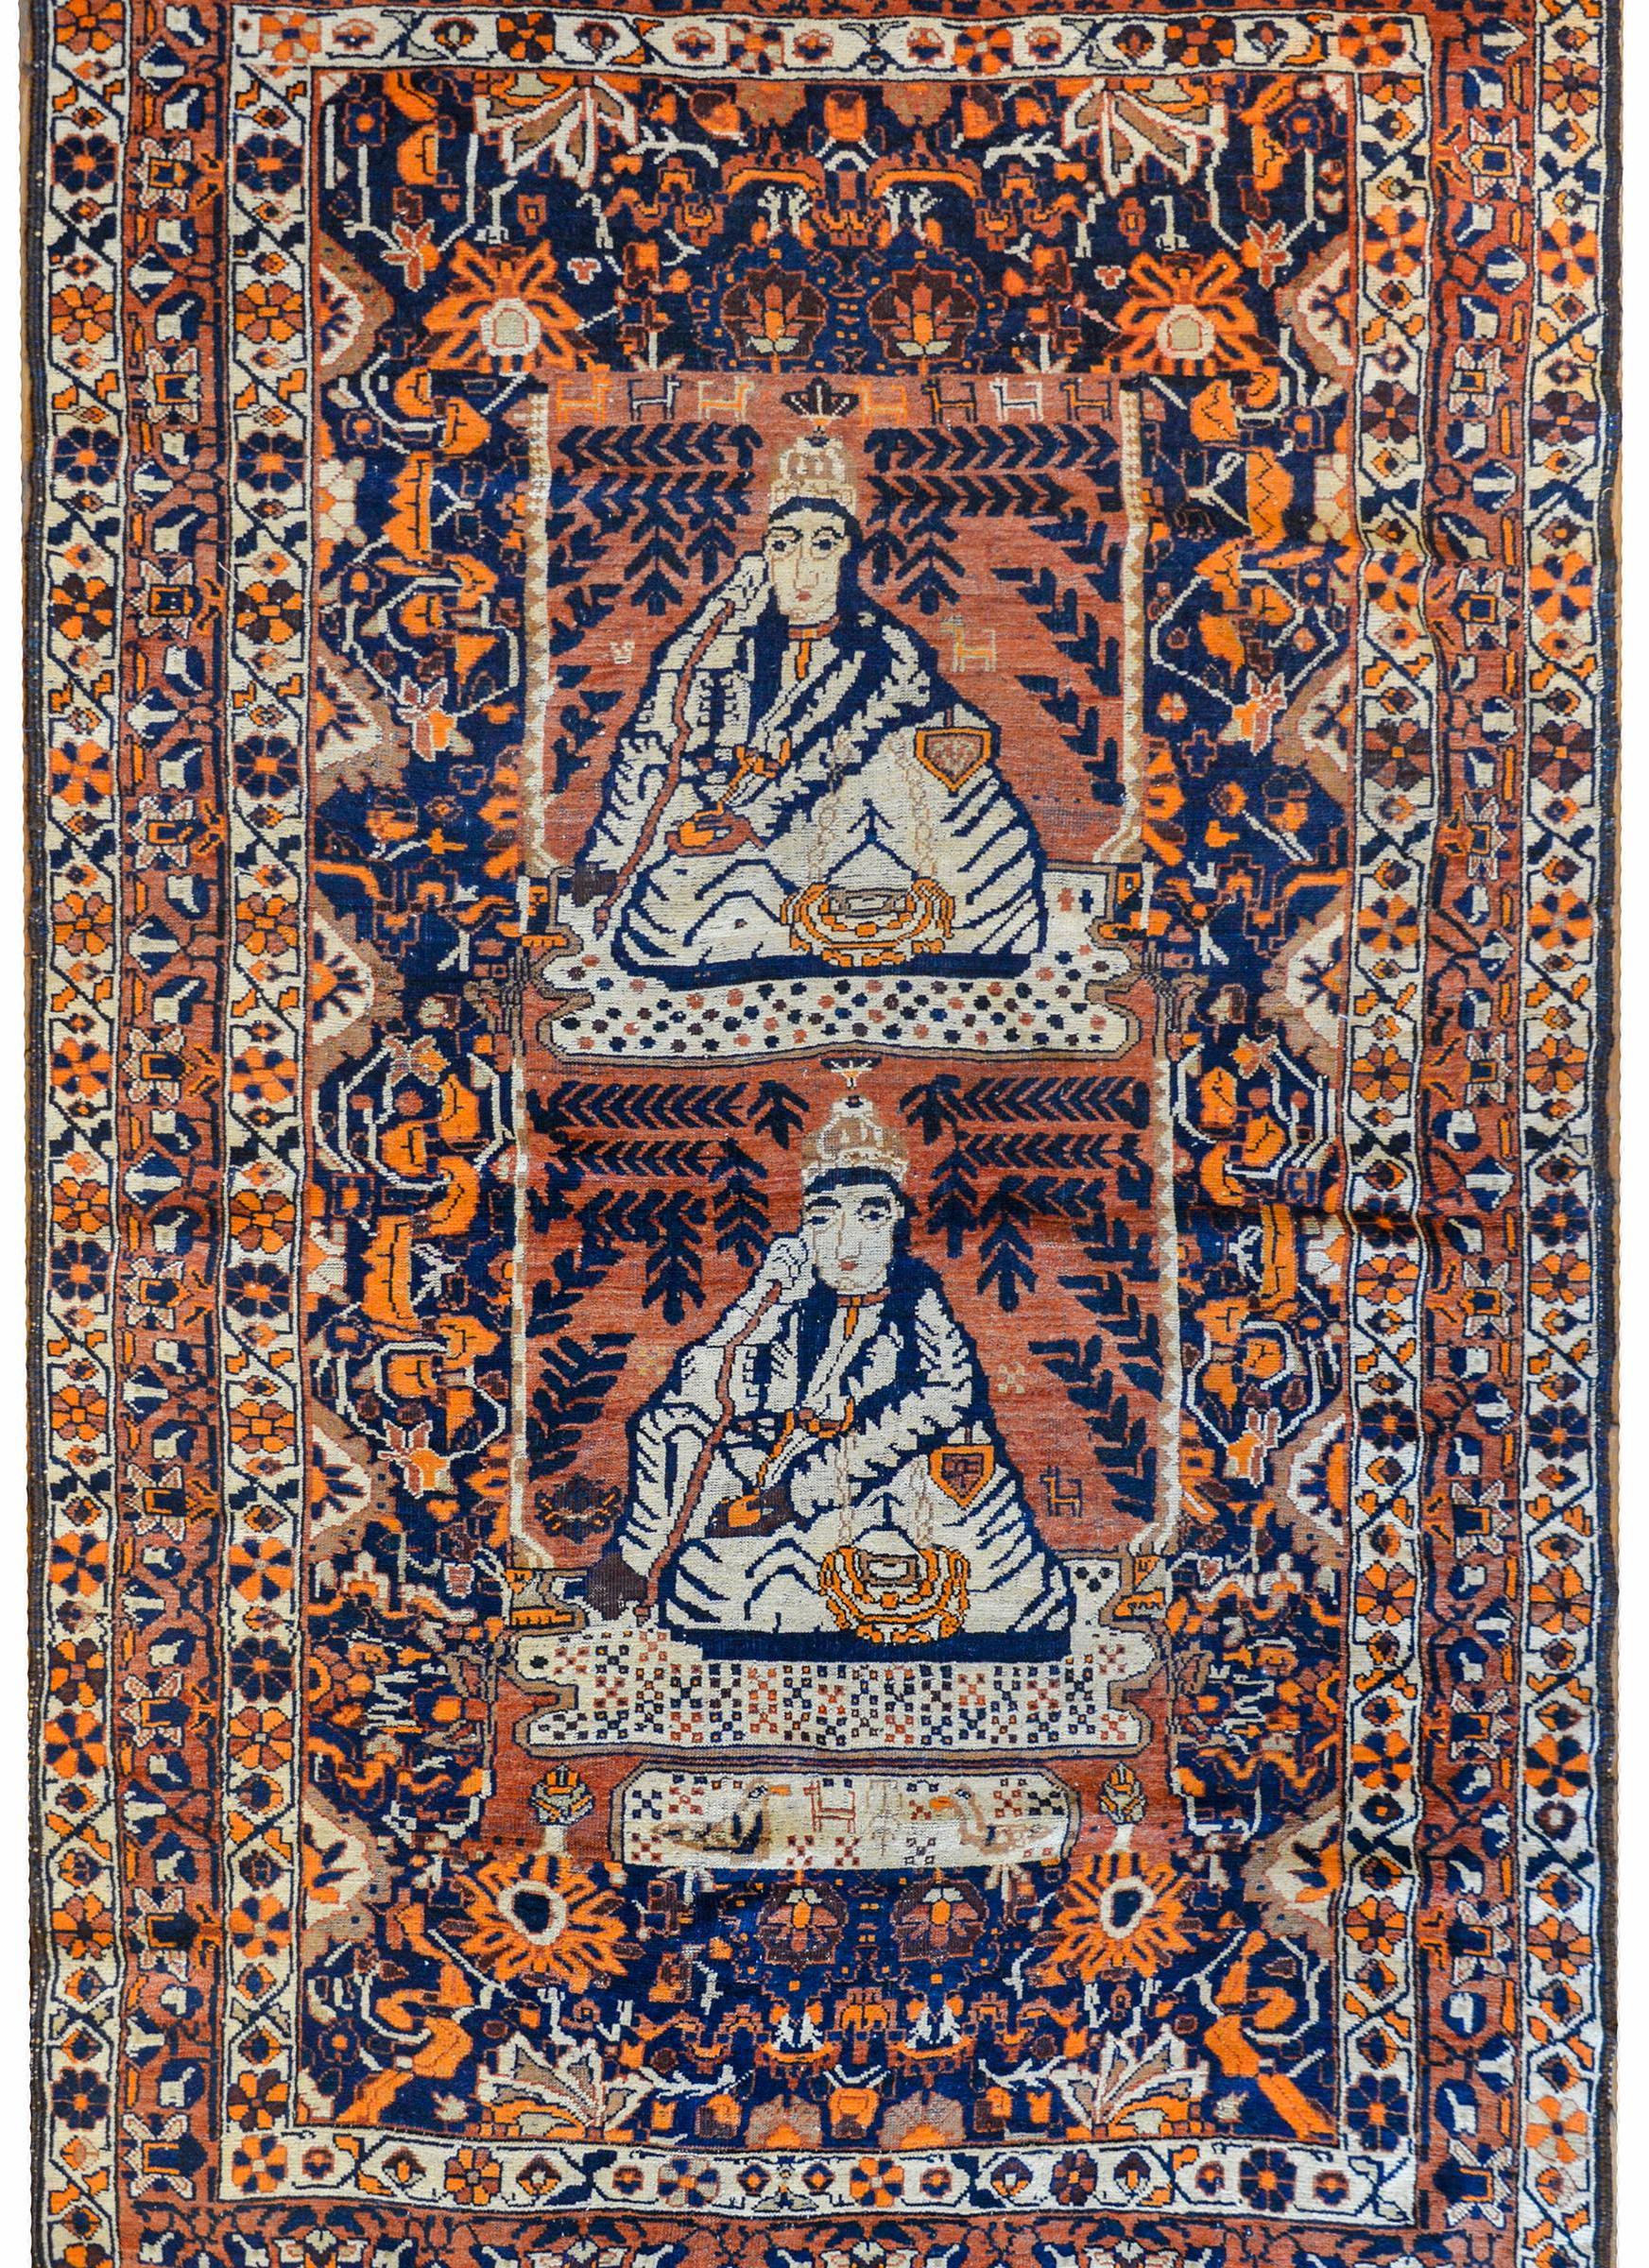 A wonderful early 20th century Persian pictorial Qashgai rug depicting a seated figure, twice, in front of a pond with ducks and chickens, amidst a lush oasis of willow trees and a field or beautifully rendered flowers, all woven in indigo, orange,